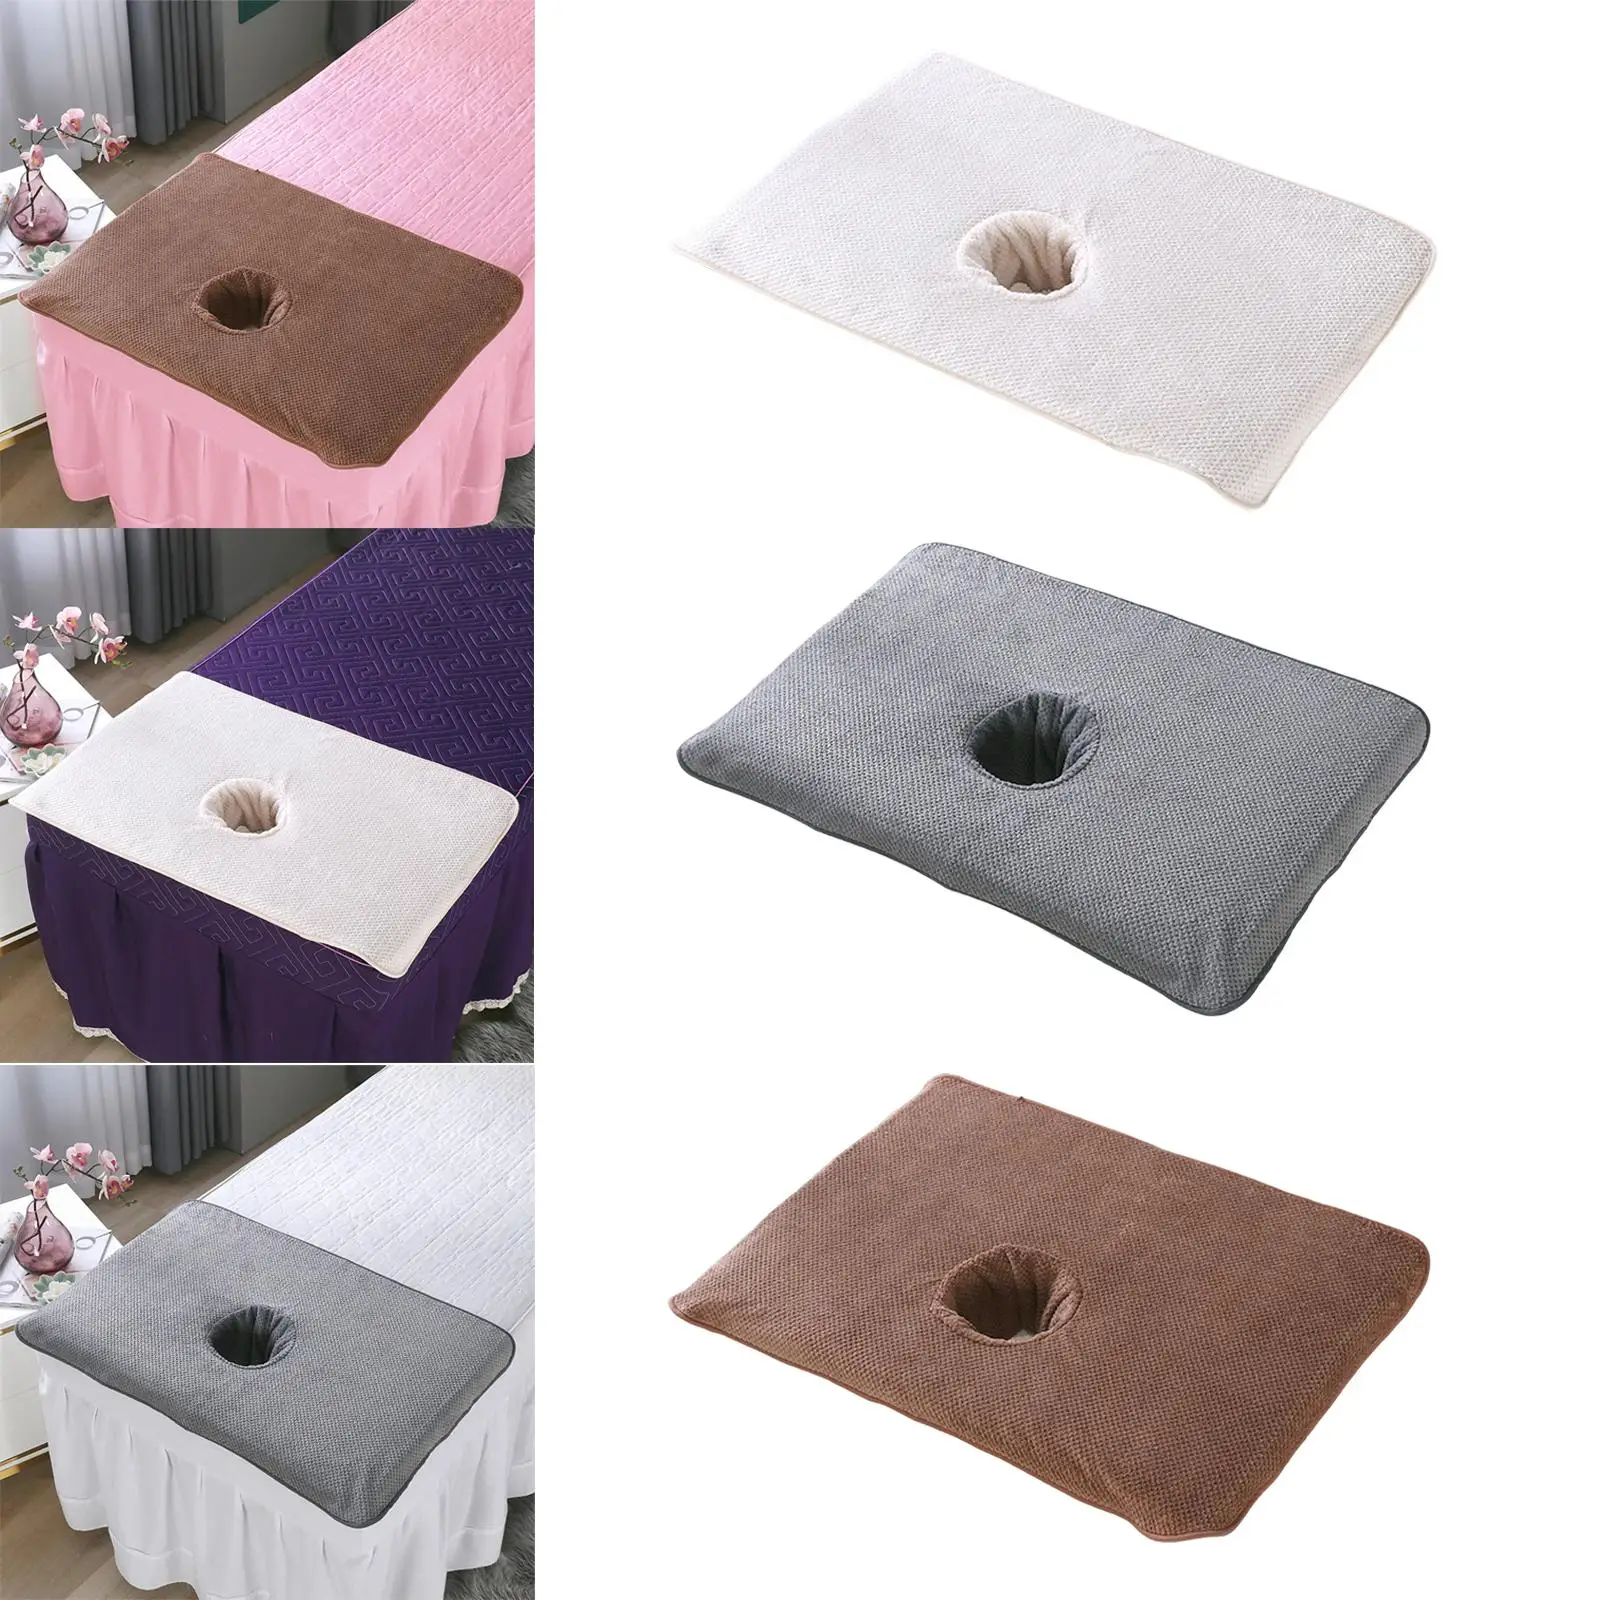 Massage Table Sheets Bed Covers with Face Breath Hole SPA Bed Sheet for SPA Massage Tables Bed Washable